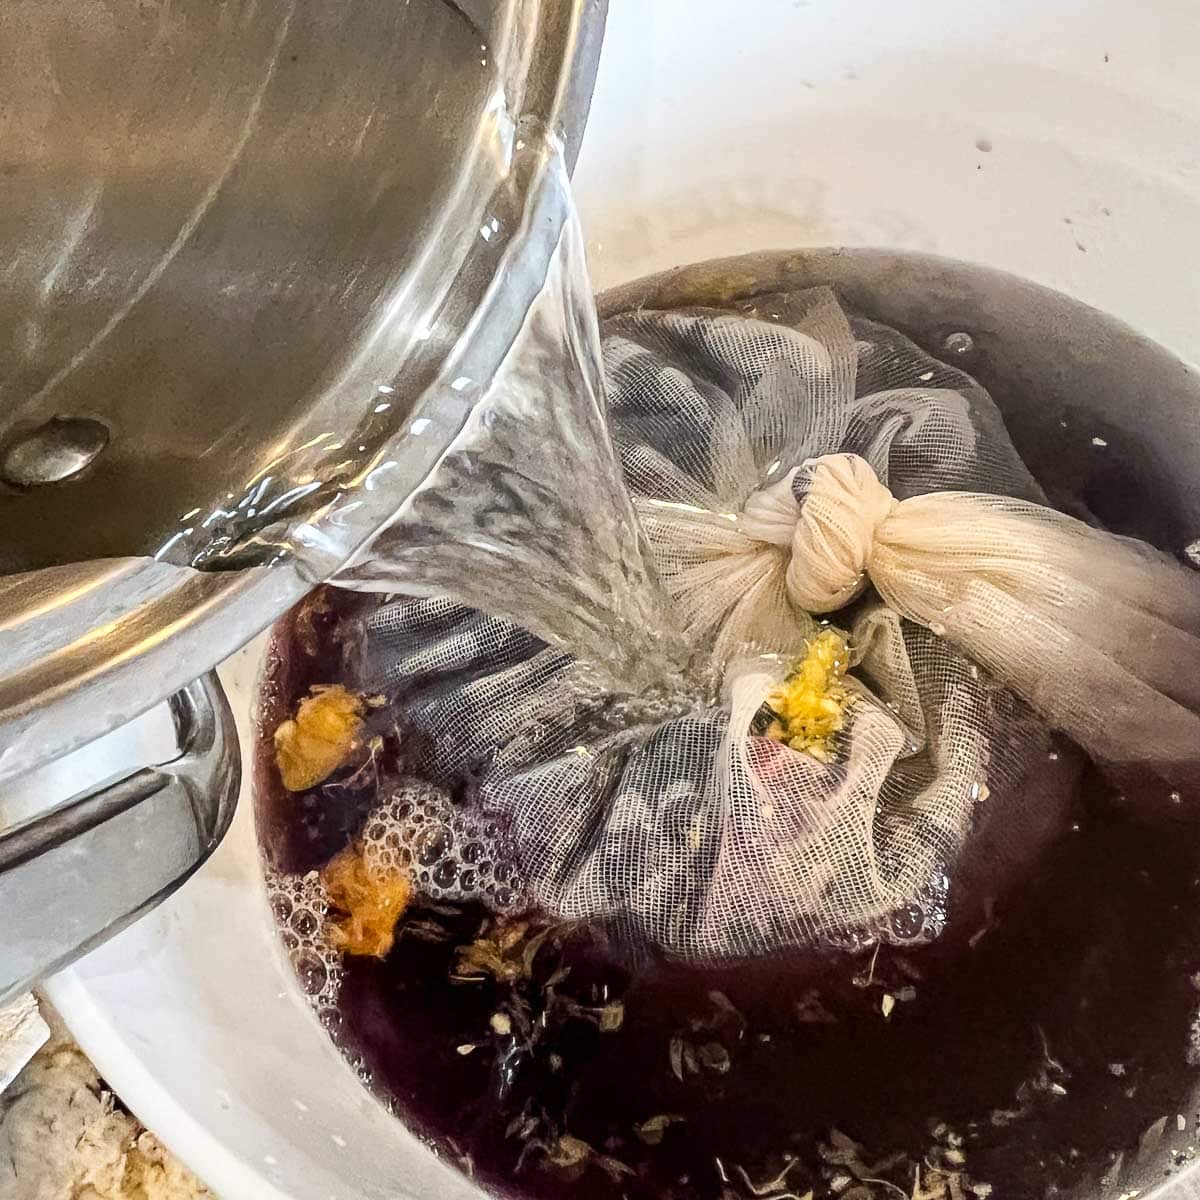 pouring water over fermentor bucket for wine